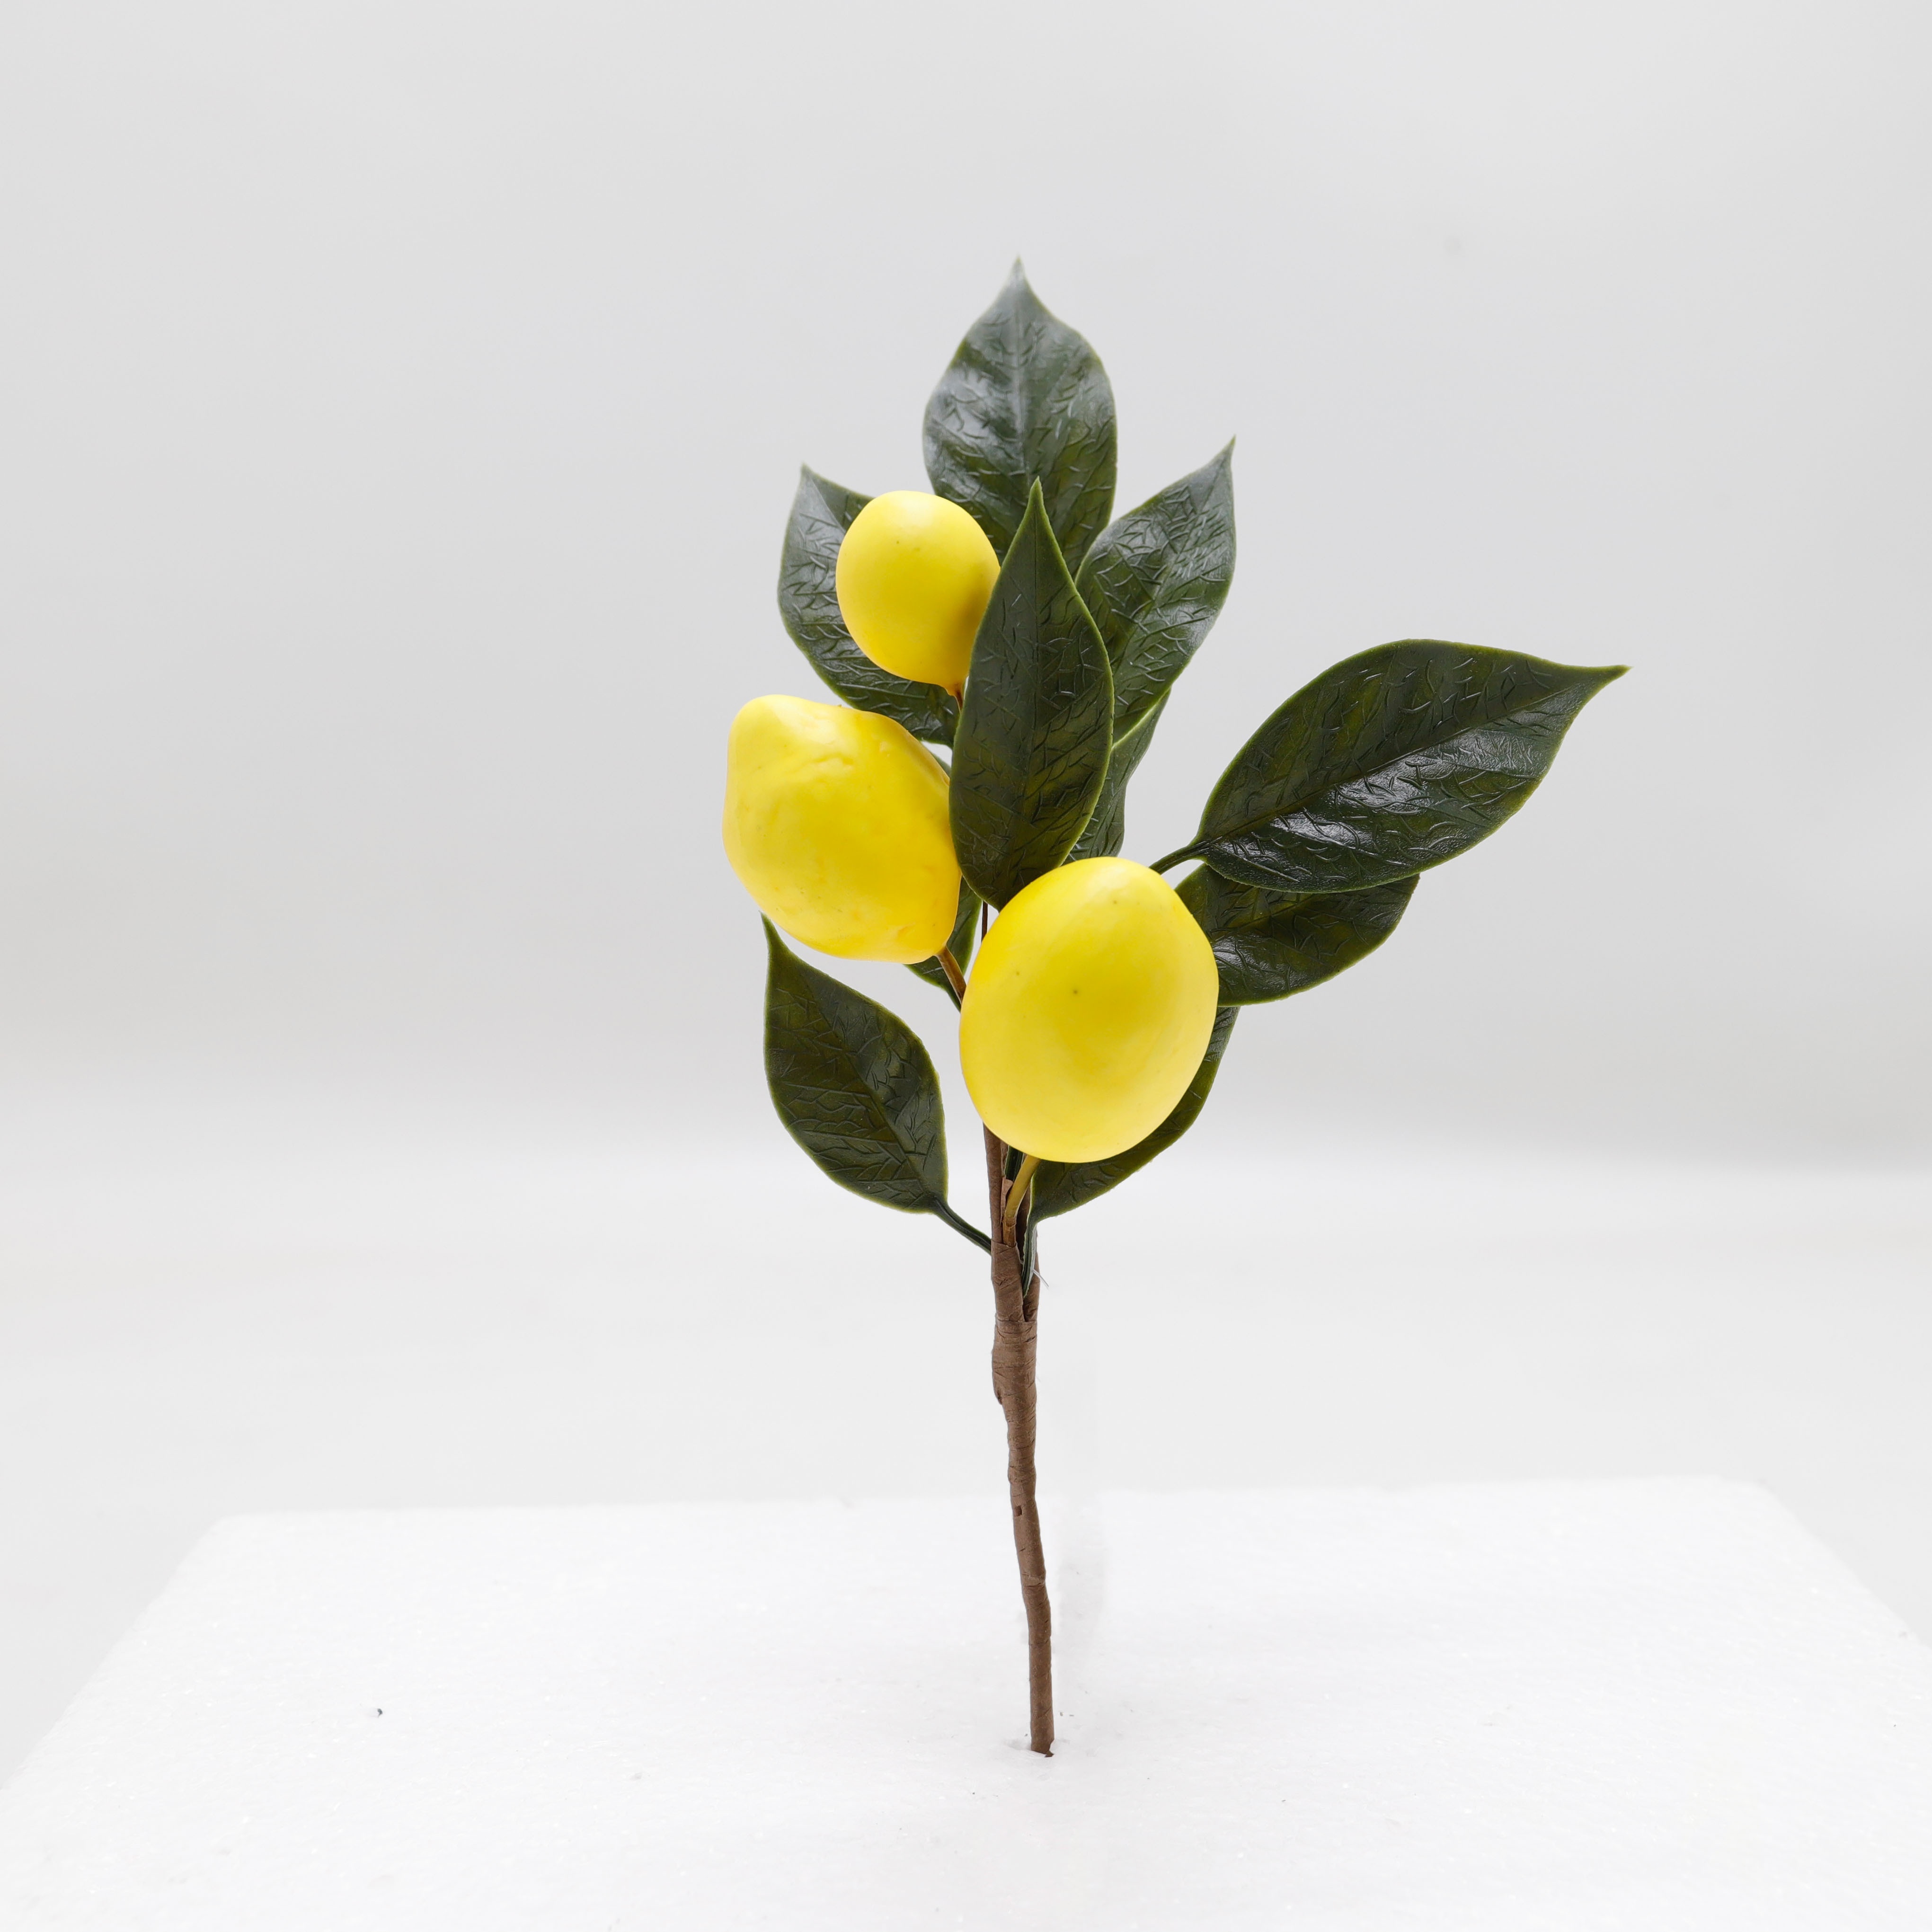 

1pc Artificial Lemon Branch, Lifelike Decorative Faux Fruit With Green Leaves, Tabletop Decor For Home, Holiday House, Vase Filler, All-season Display, Plastic Craft